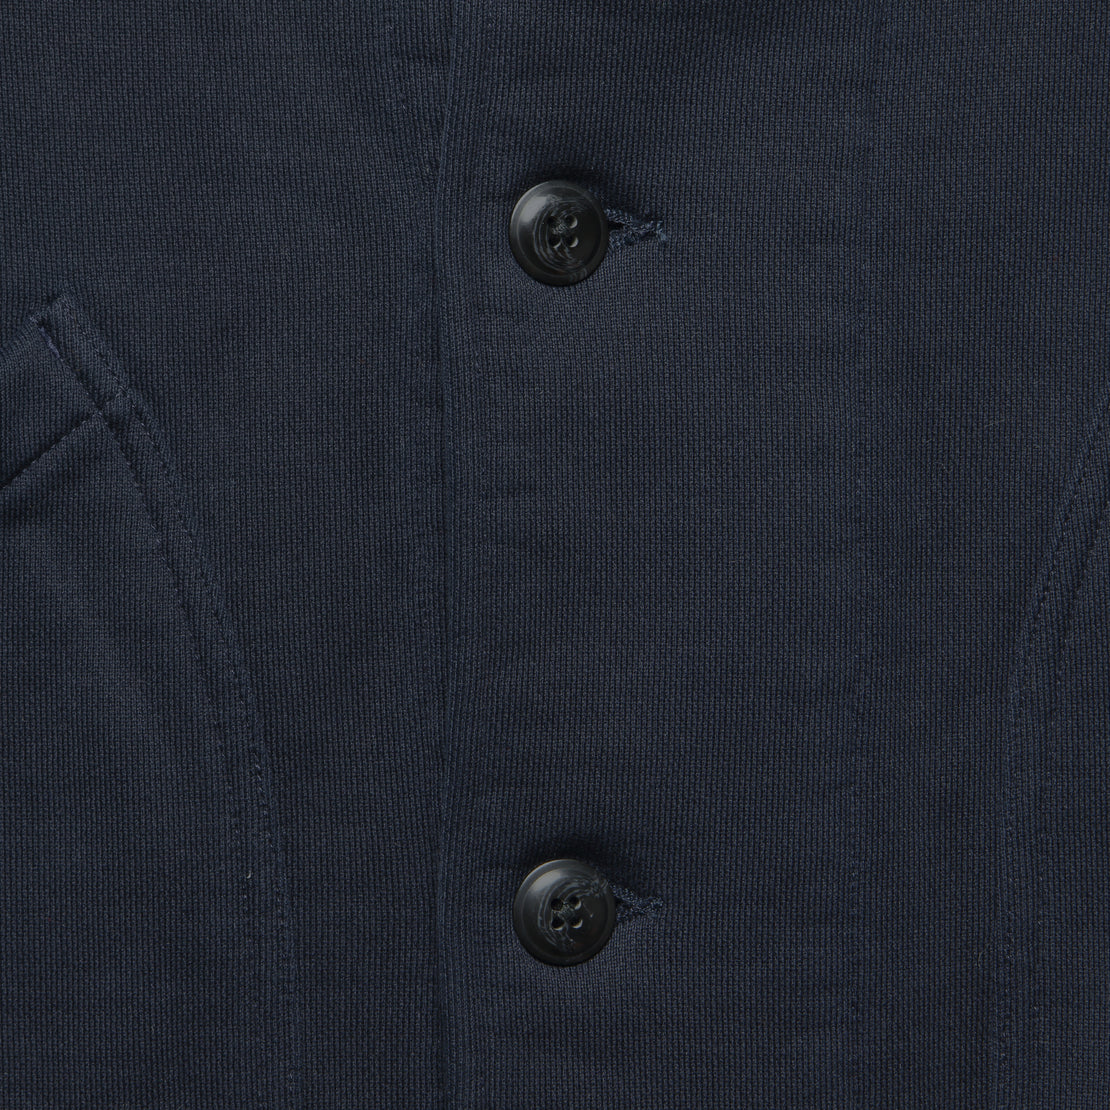 Melville Fleece Knacket - Navy - Grayers - STAG Provisions - Outerwear - Coat / Jacket